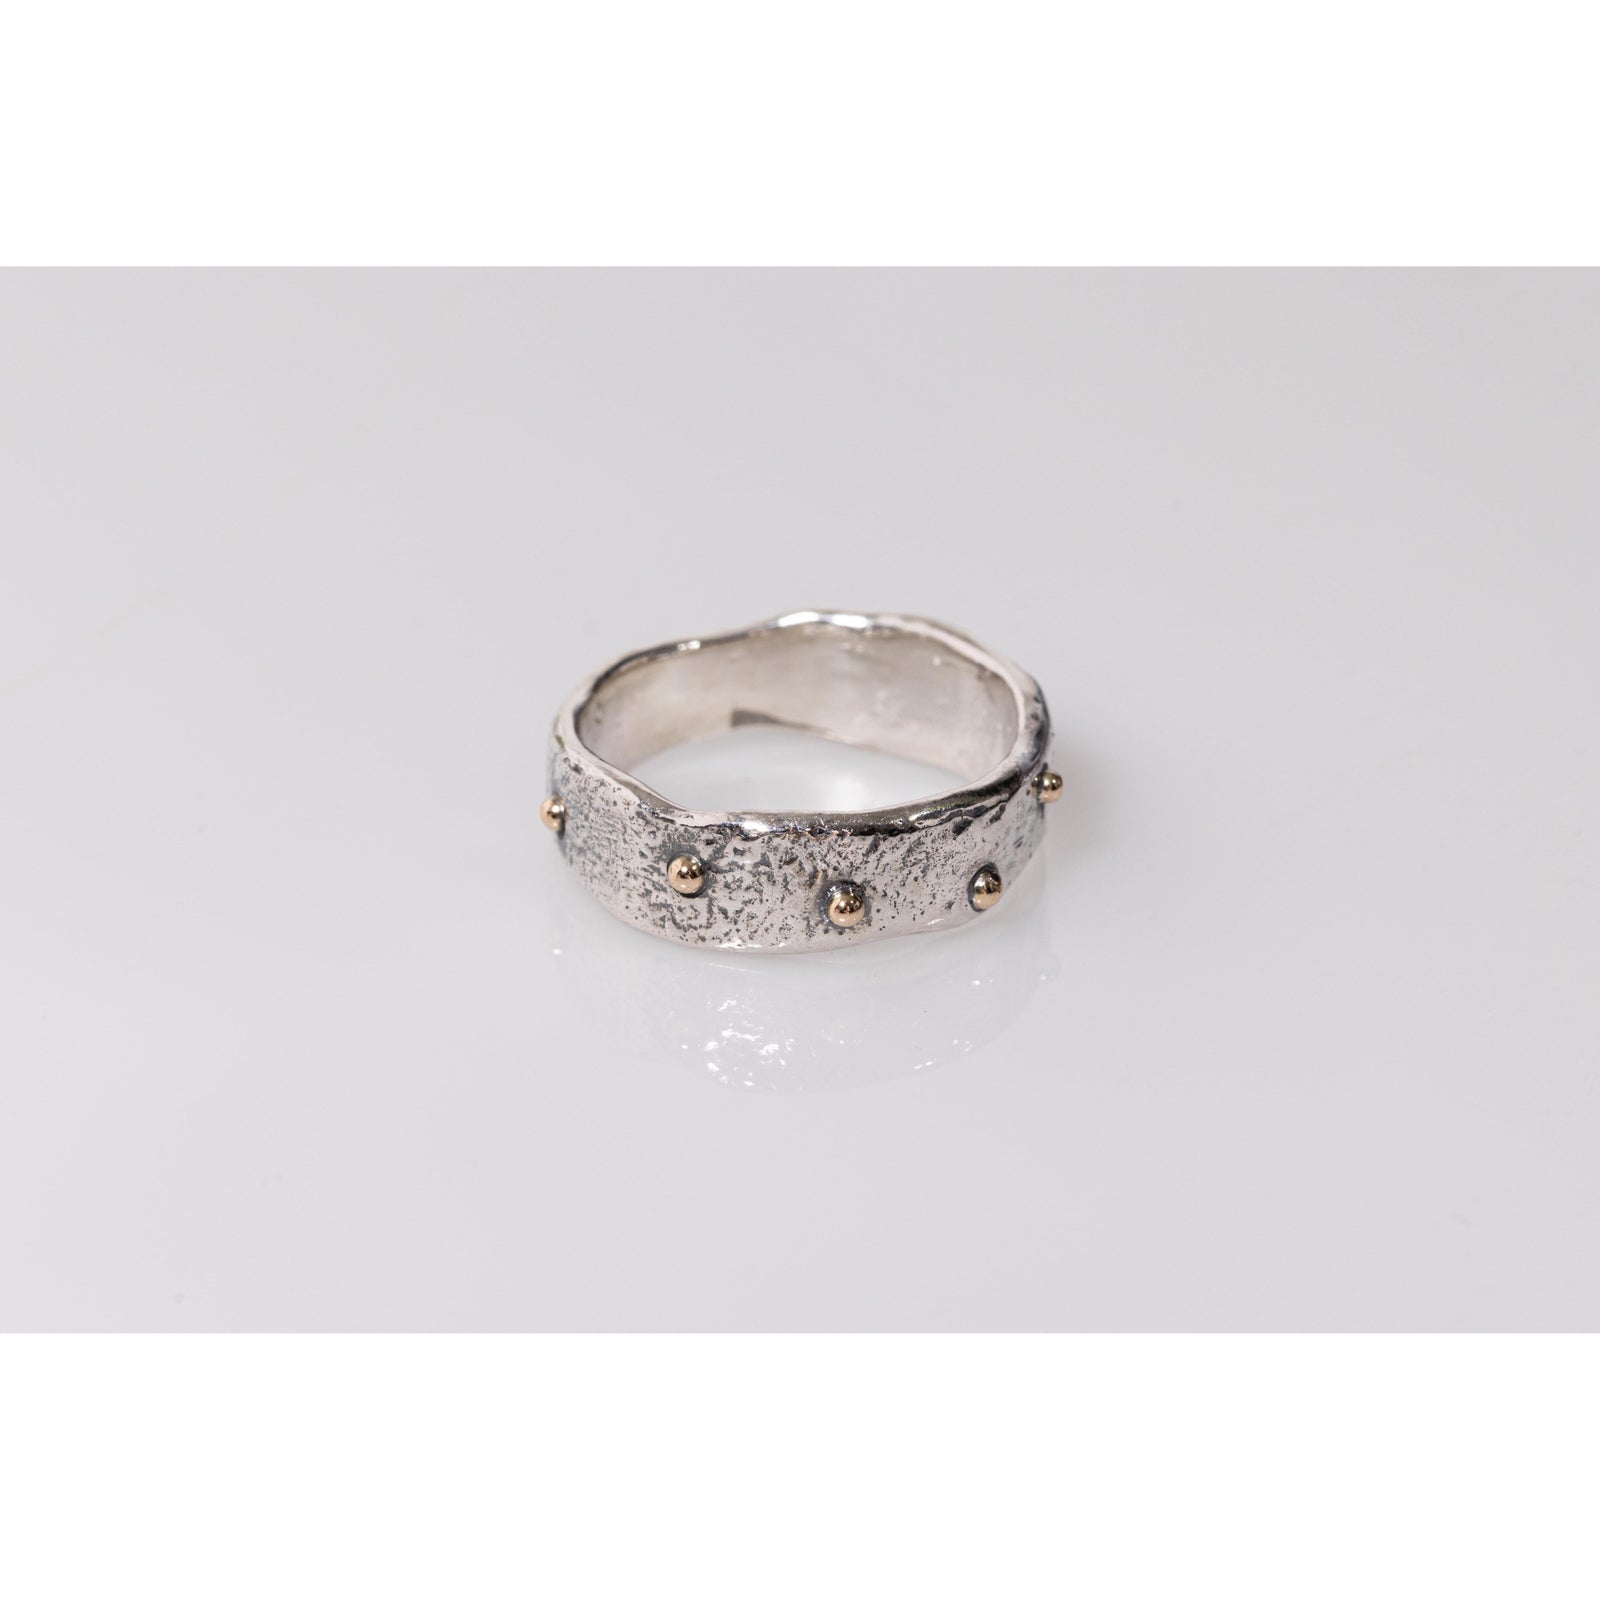 'SA R15 Organic Silver Ring' by Sandra Austin jewellery, available at Padstow Gallery, Cornwall